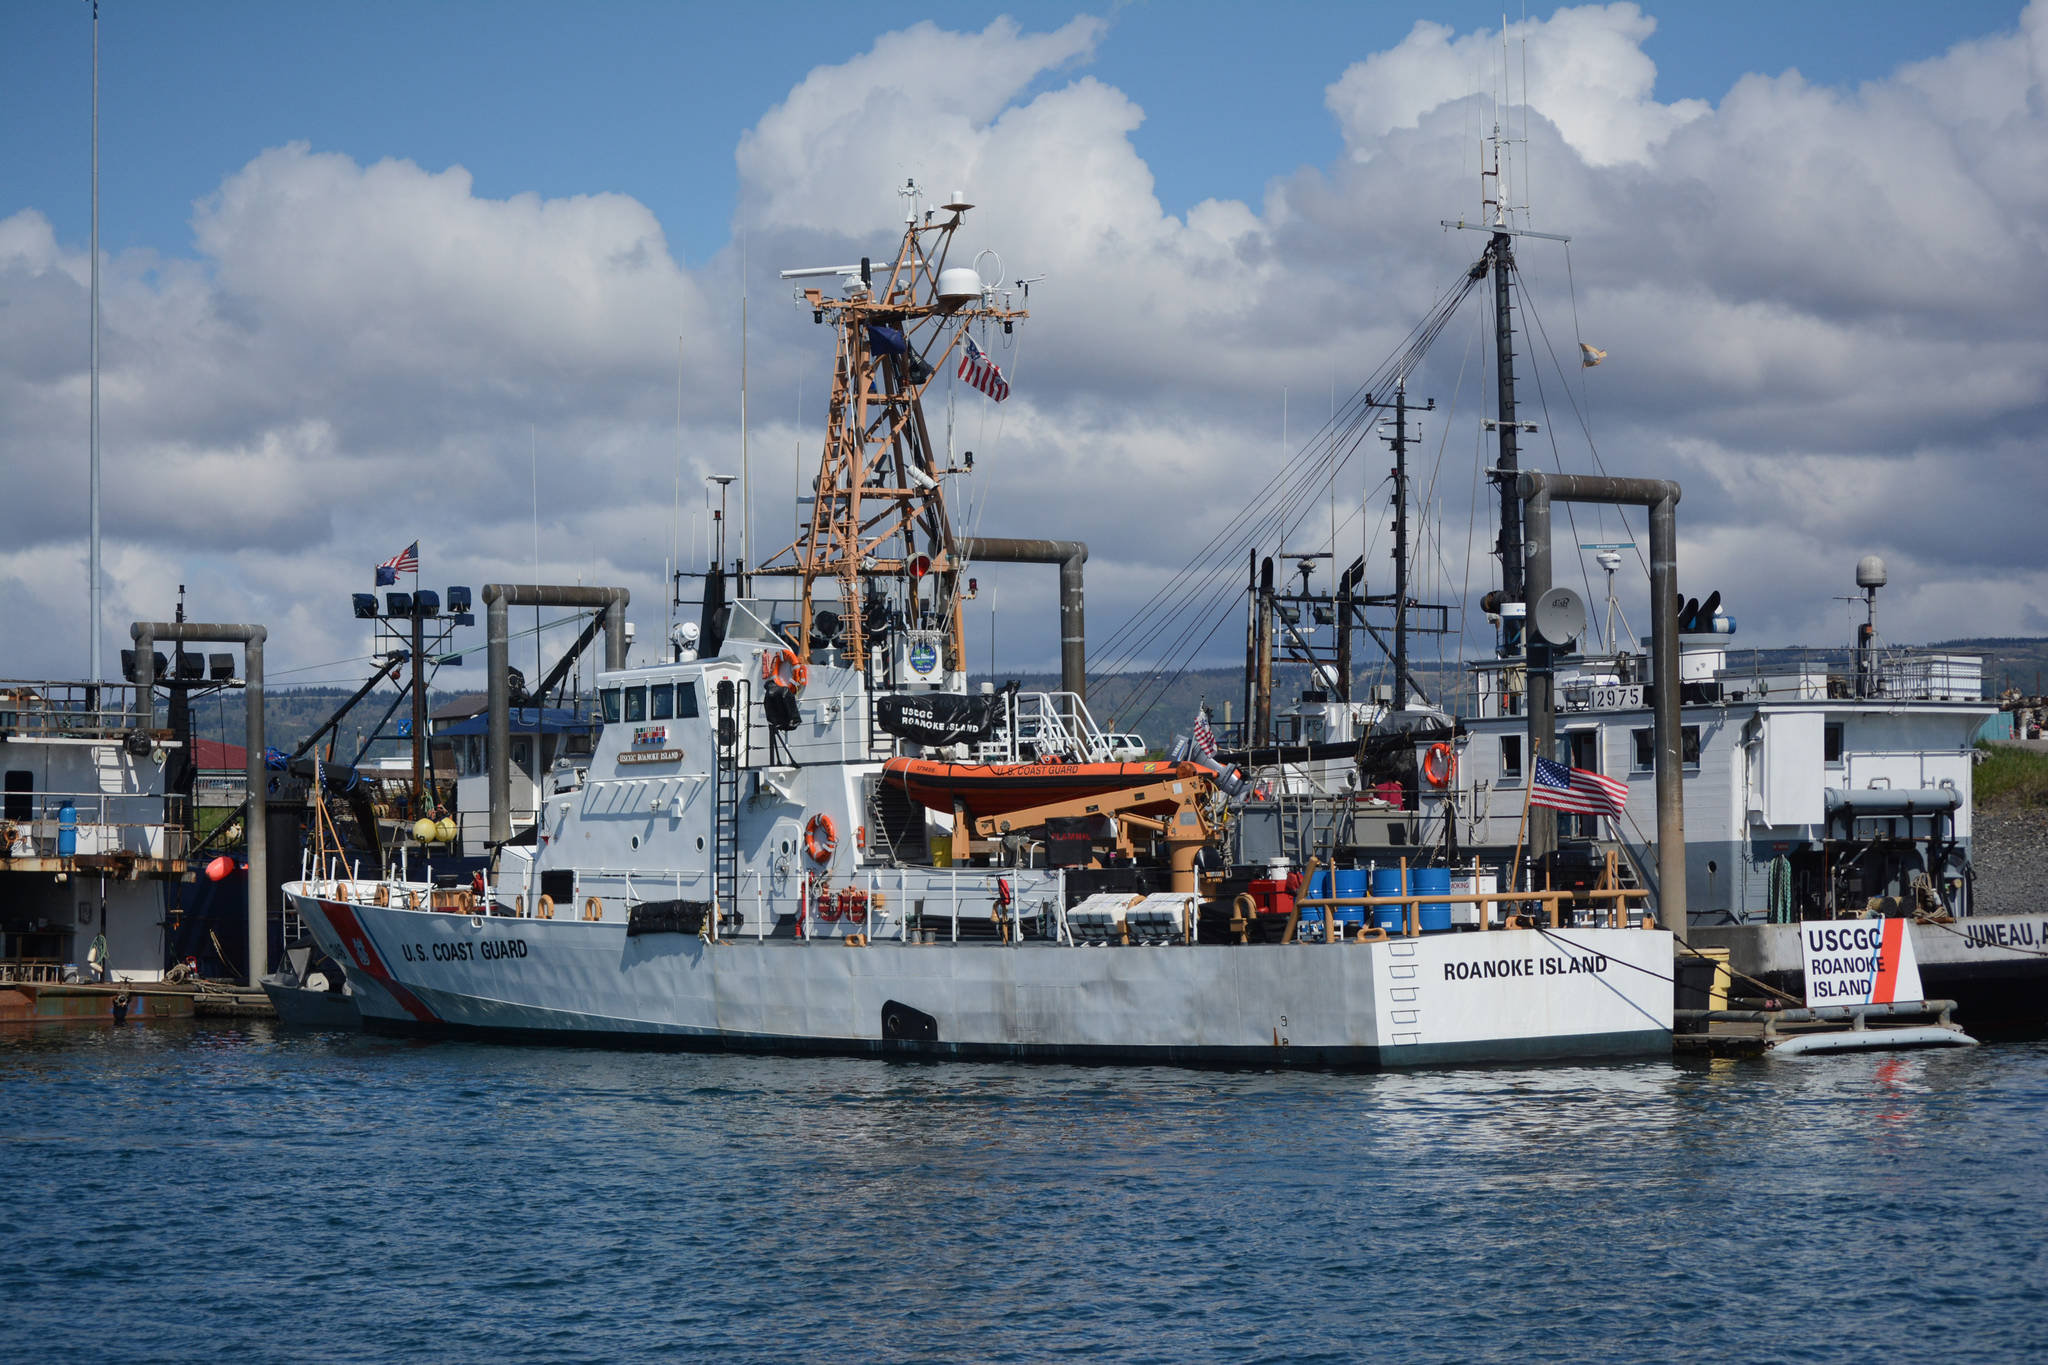 The U.S. Coast Guard Cutter Roanoke Island is moored at the Homer Harbor on June 2, 2015, in Homer. Commissioned in 1992, the 110-foot Island class cutter was decommissioned that month. (Photo by Michael Armstrong/Homer News)